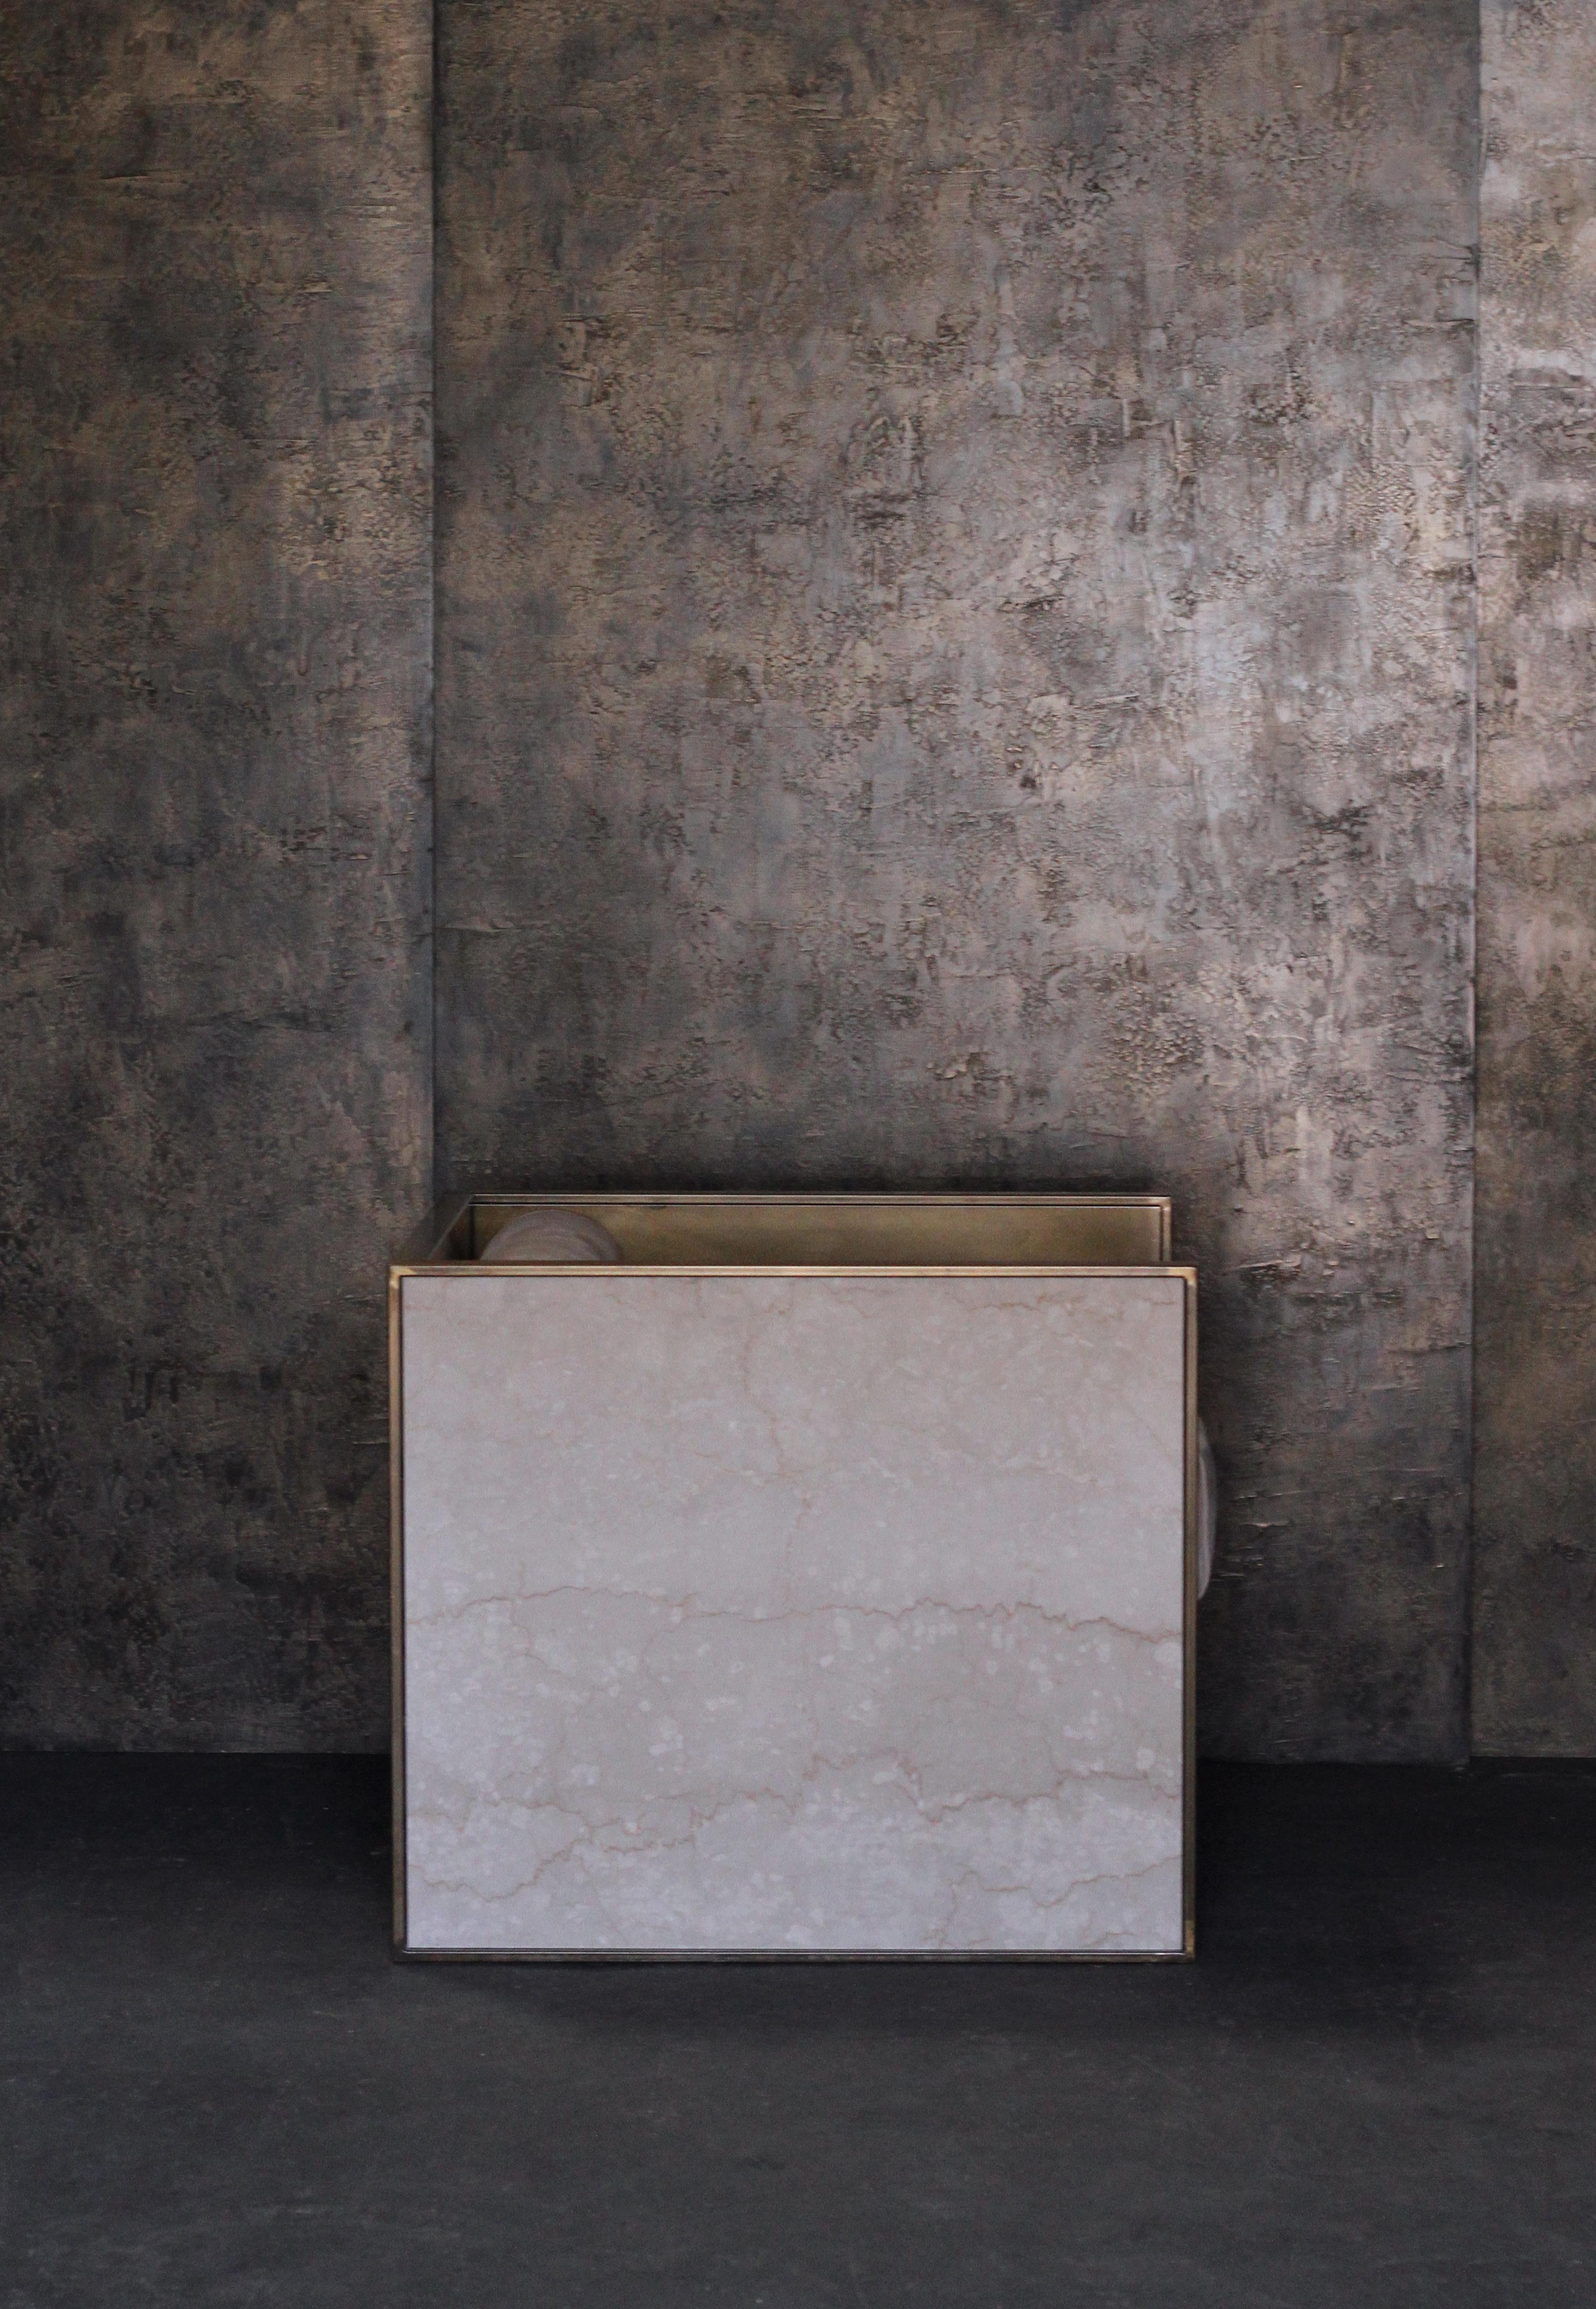 The (wh)ORE HAüS STUDIOS Stone Lounge Chair is made of steel, marble and leather. This piece is made to order and can, therefore, be customized. 

(wh)ORE HAüS STUDIOS is a female run and operated design studio based in Downtown Los Angeles.